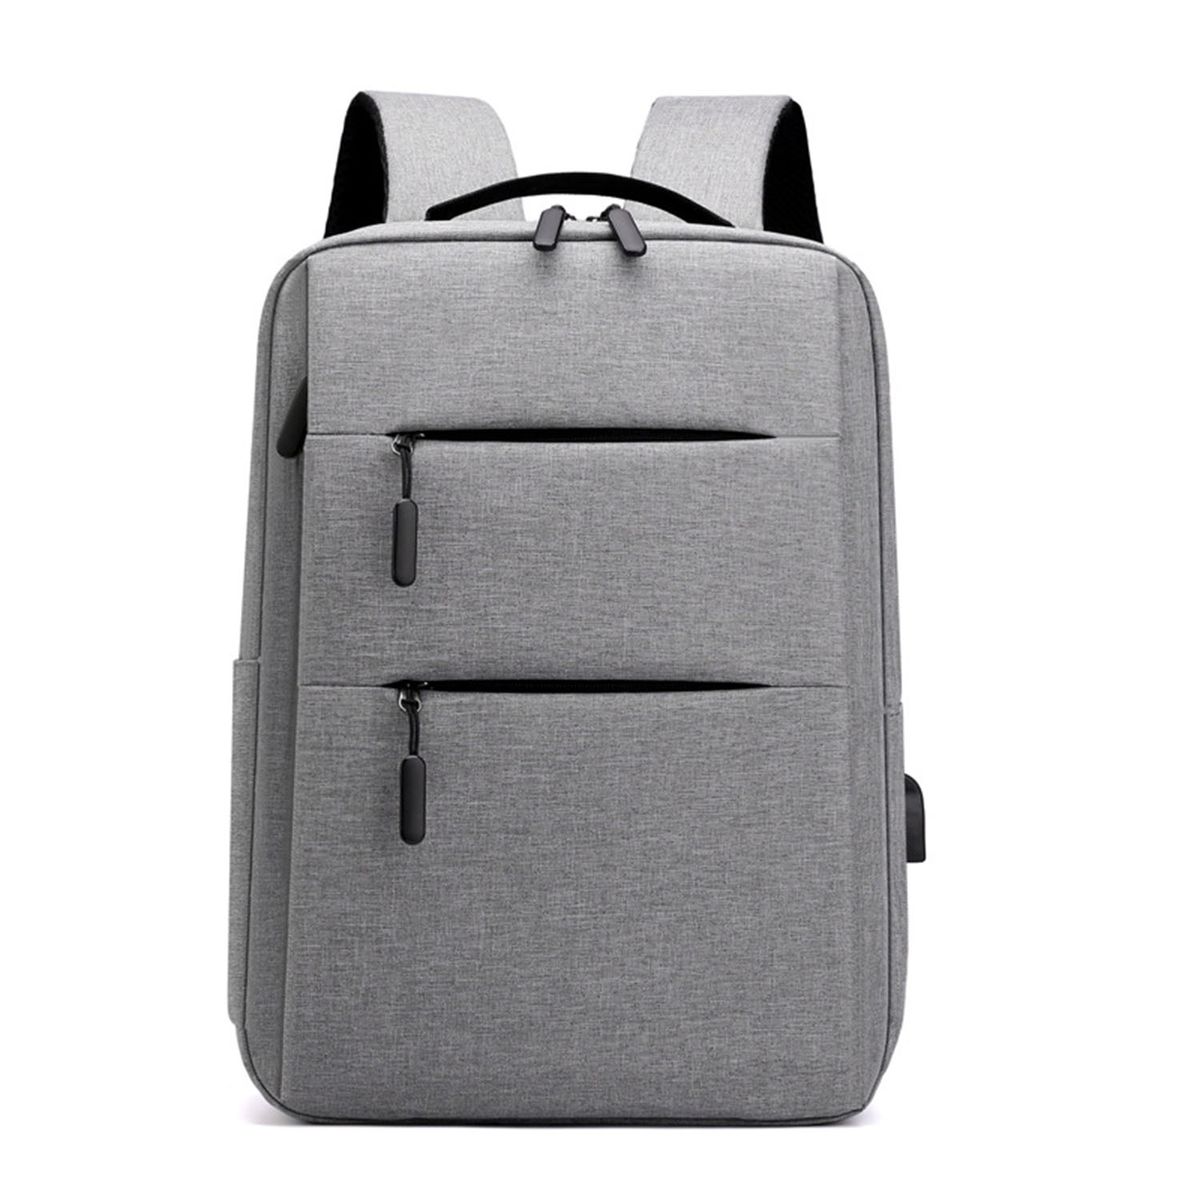 Anti-Theft Laptop Backpack for Travel Business with USB Charging Port ...